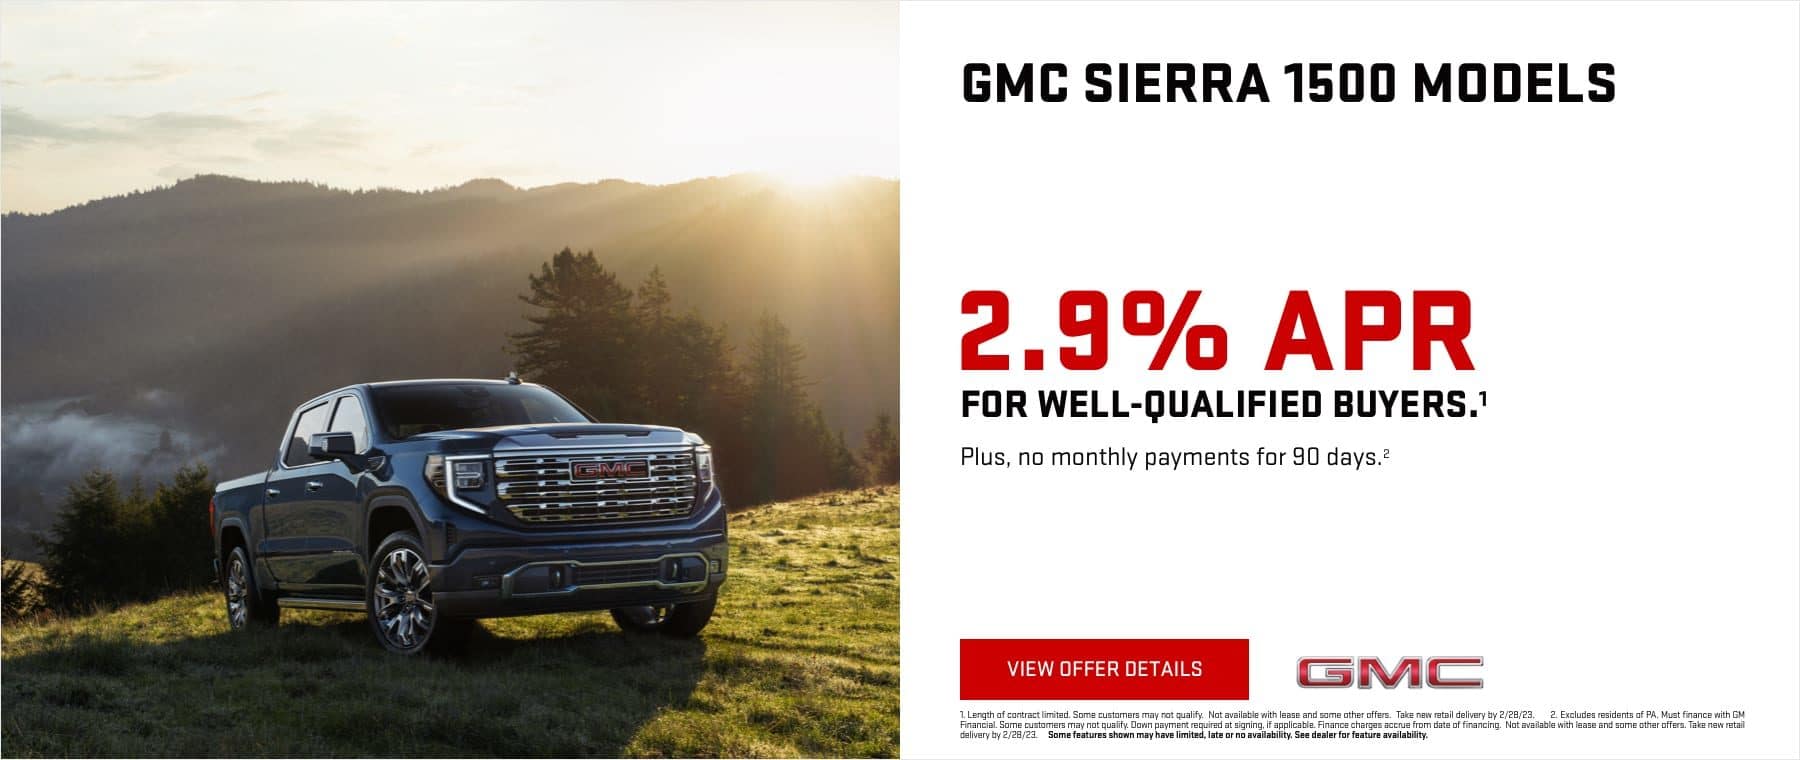 2.9% APR for well-qualified buyers.1 PLUS, NO MONTHLY PAYMENTS FOR 90 DAYS. 2